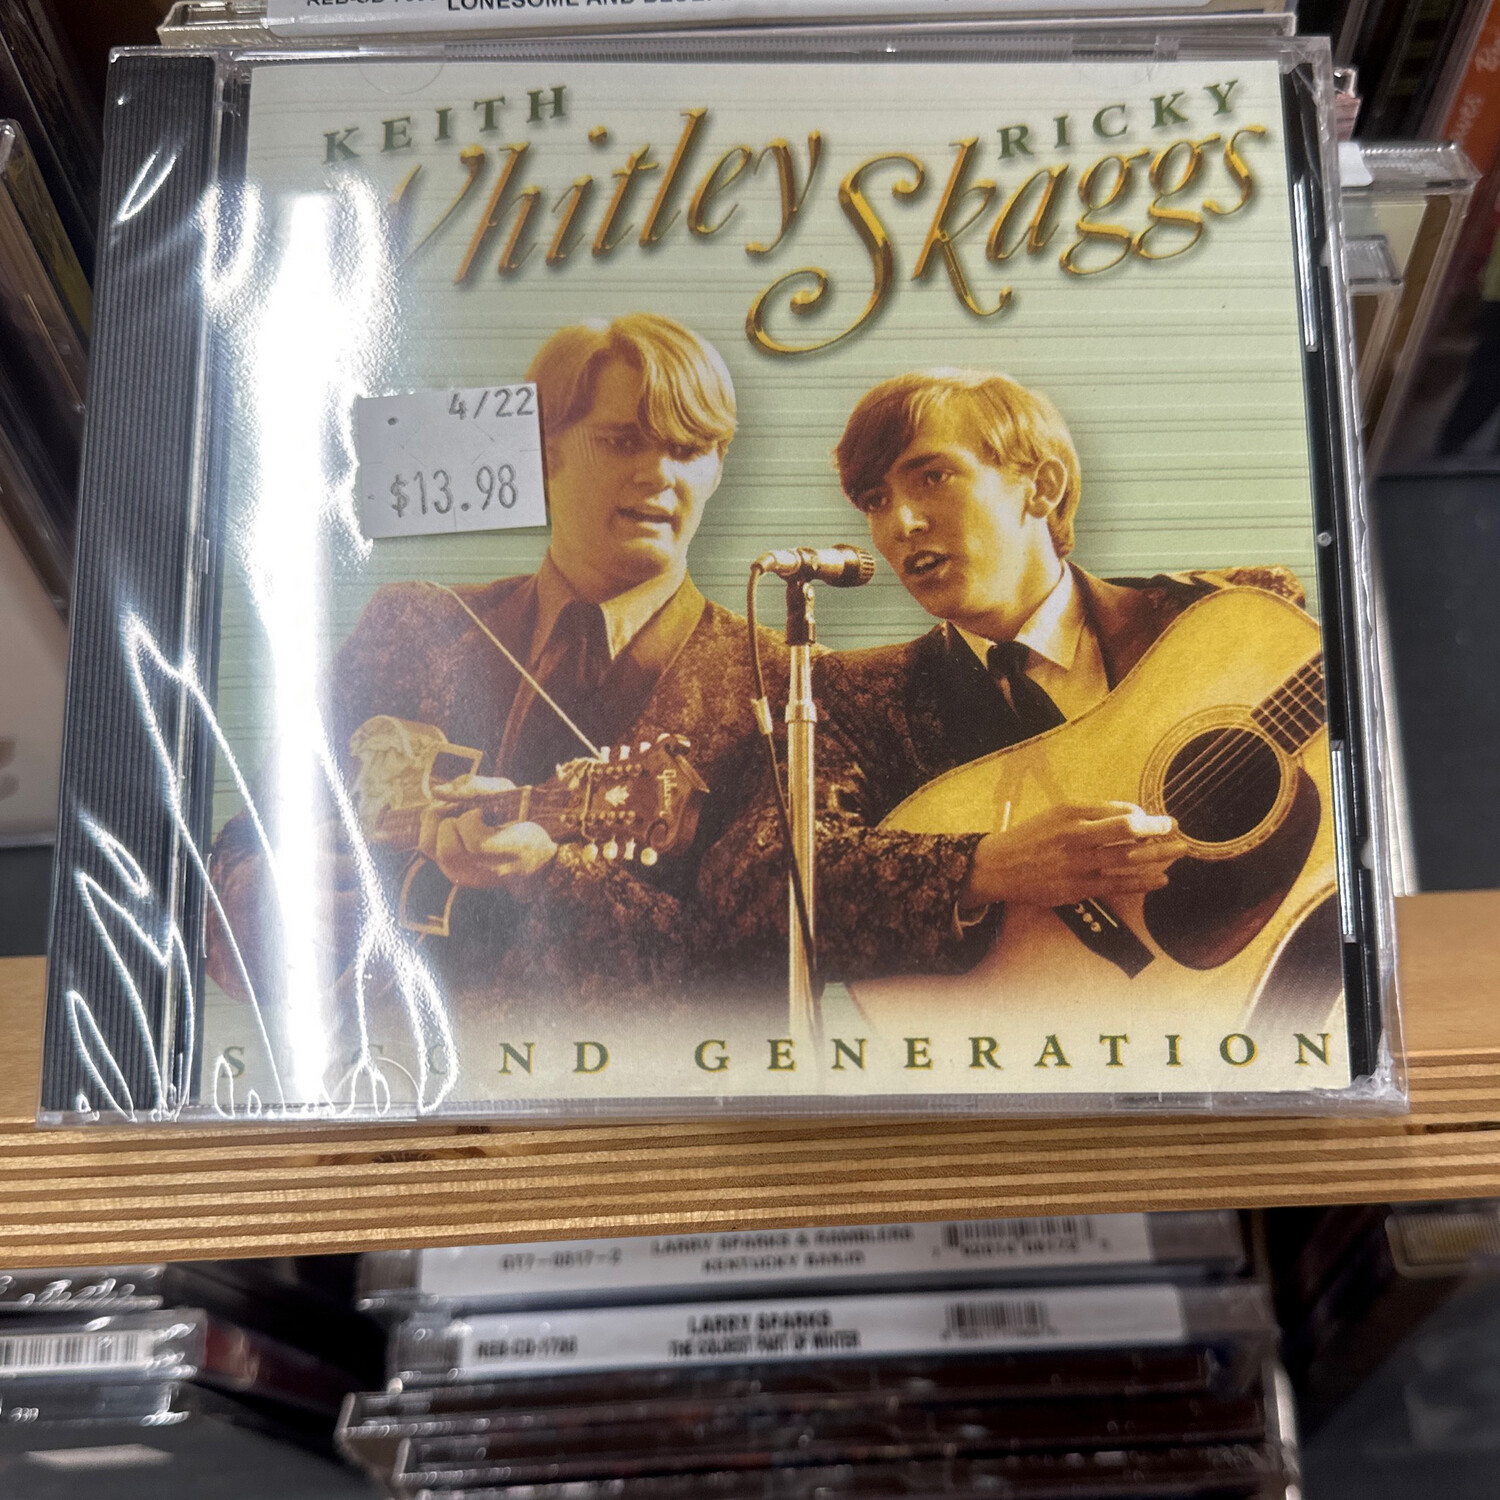 Whitley, Keith & Ricky Skaggs-Second Gen